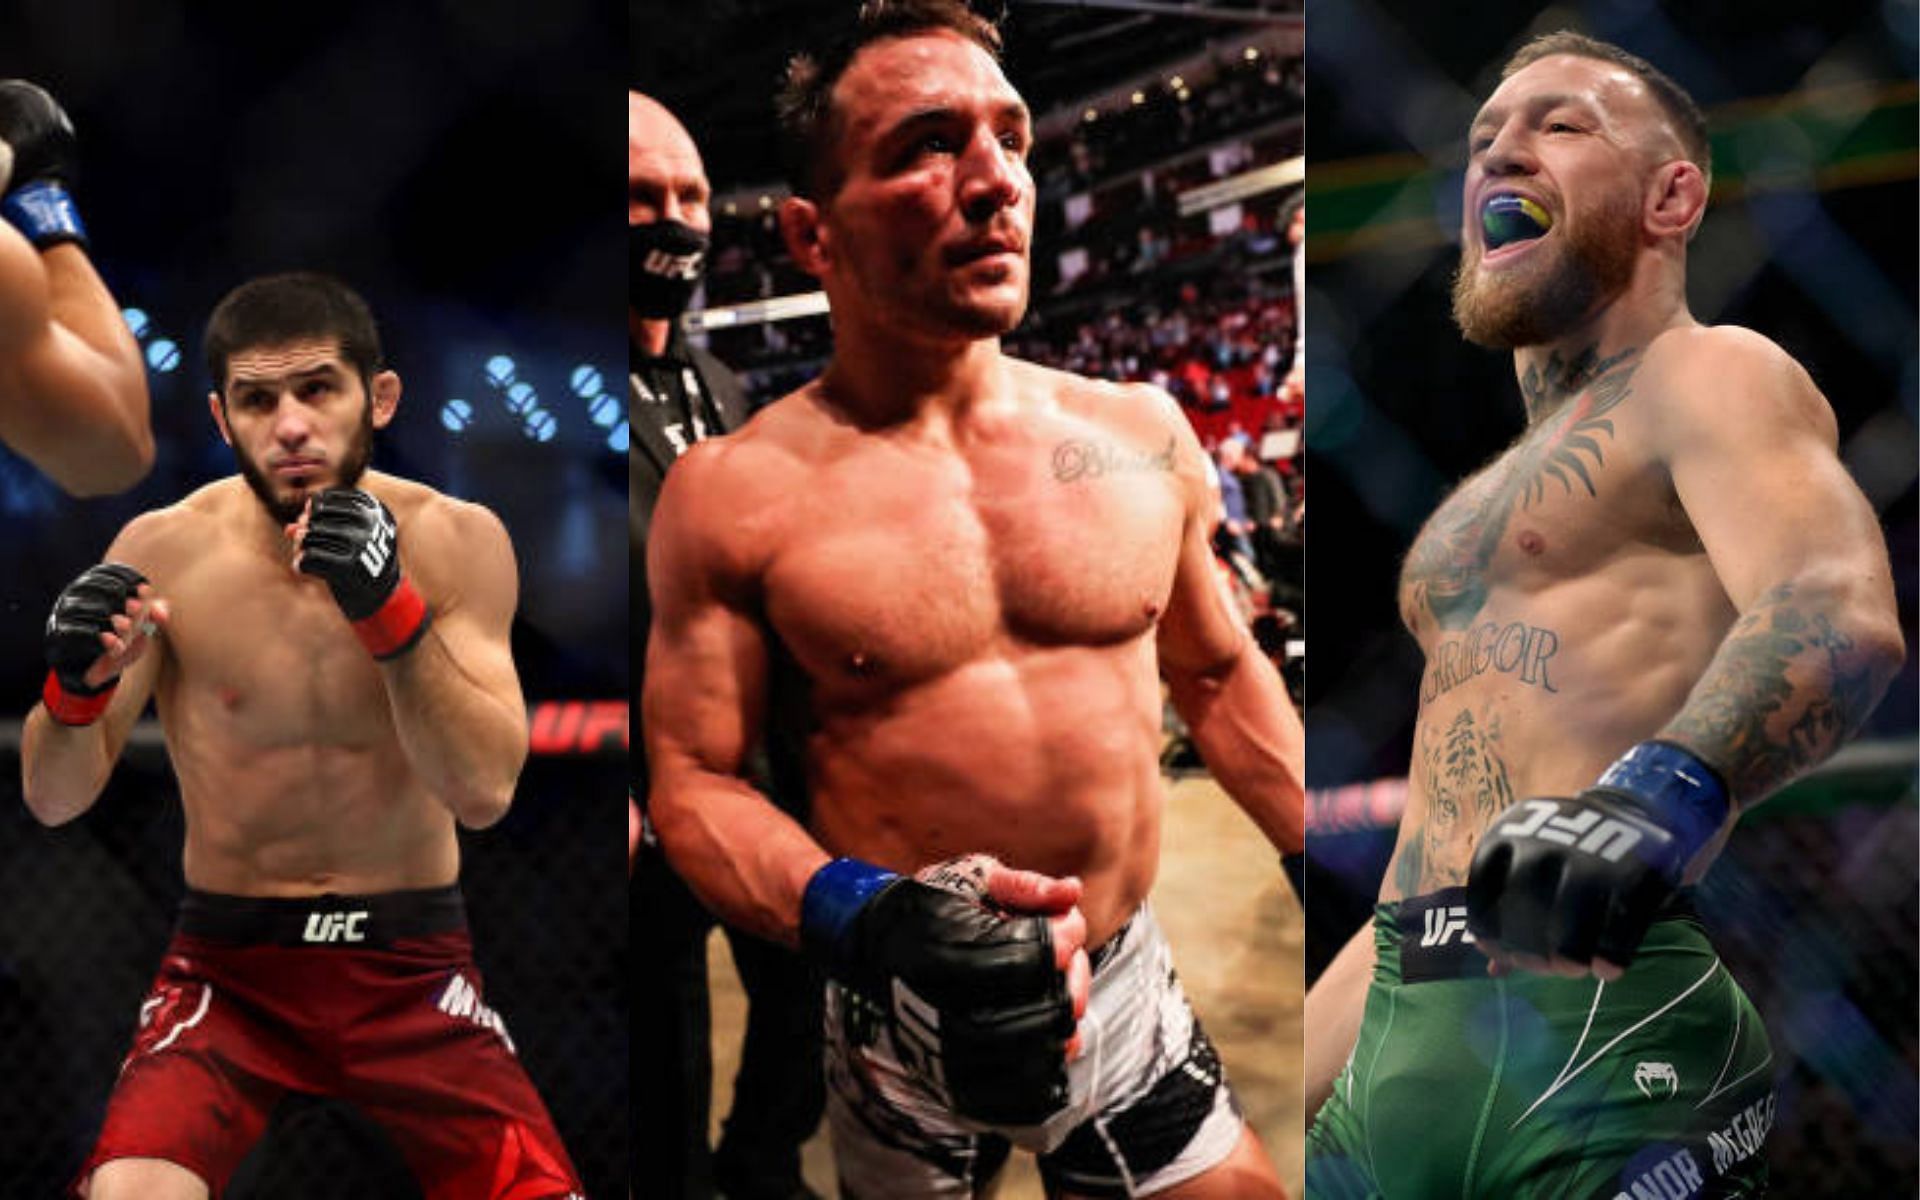 From left to right: Islam Makhachev, Michael Chandler, and Conor McGregor